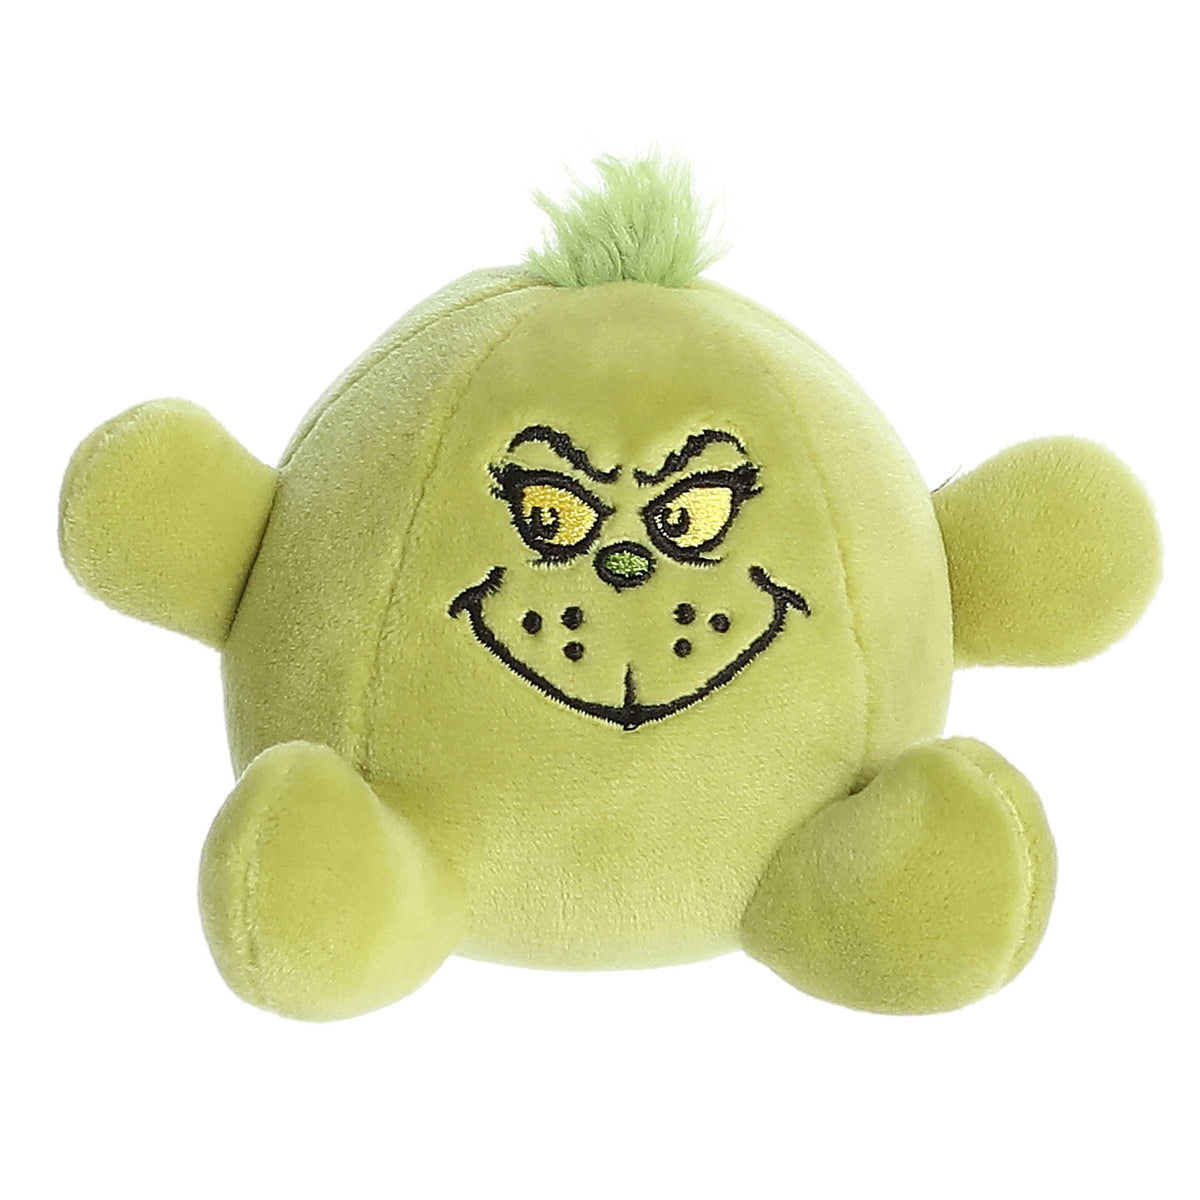 Stress ball Grinch plush with Grinch's grimace and "Resting Grinch Face" quote embroidered on back by Dr. Seuss.